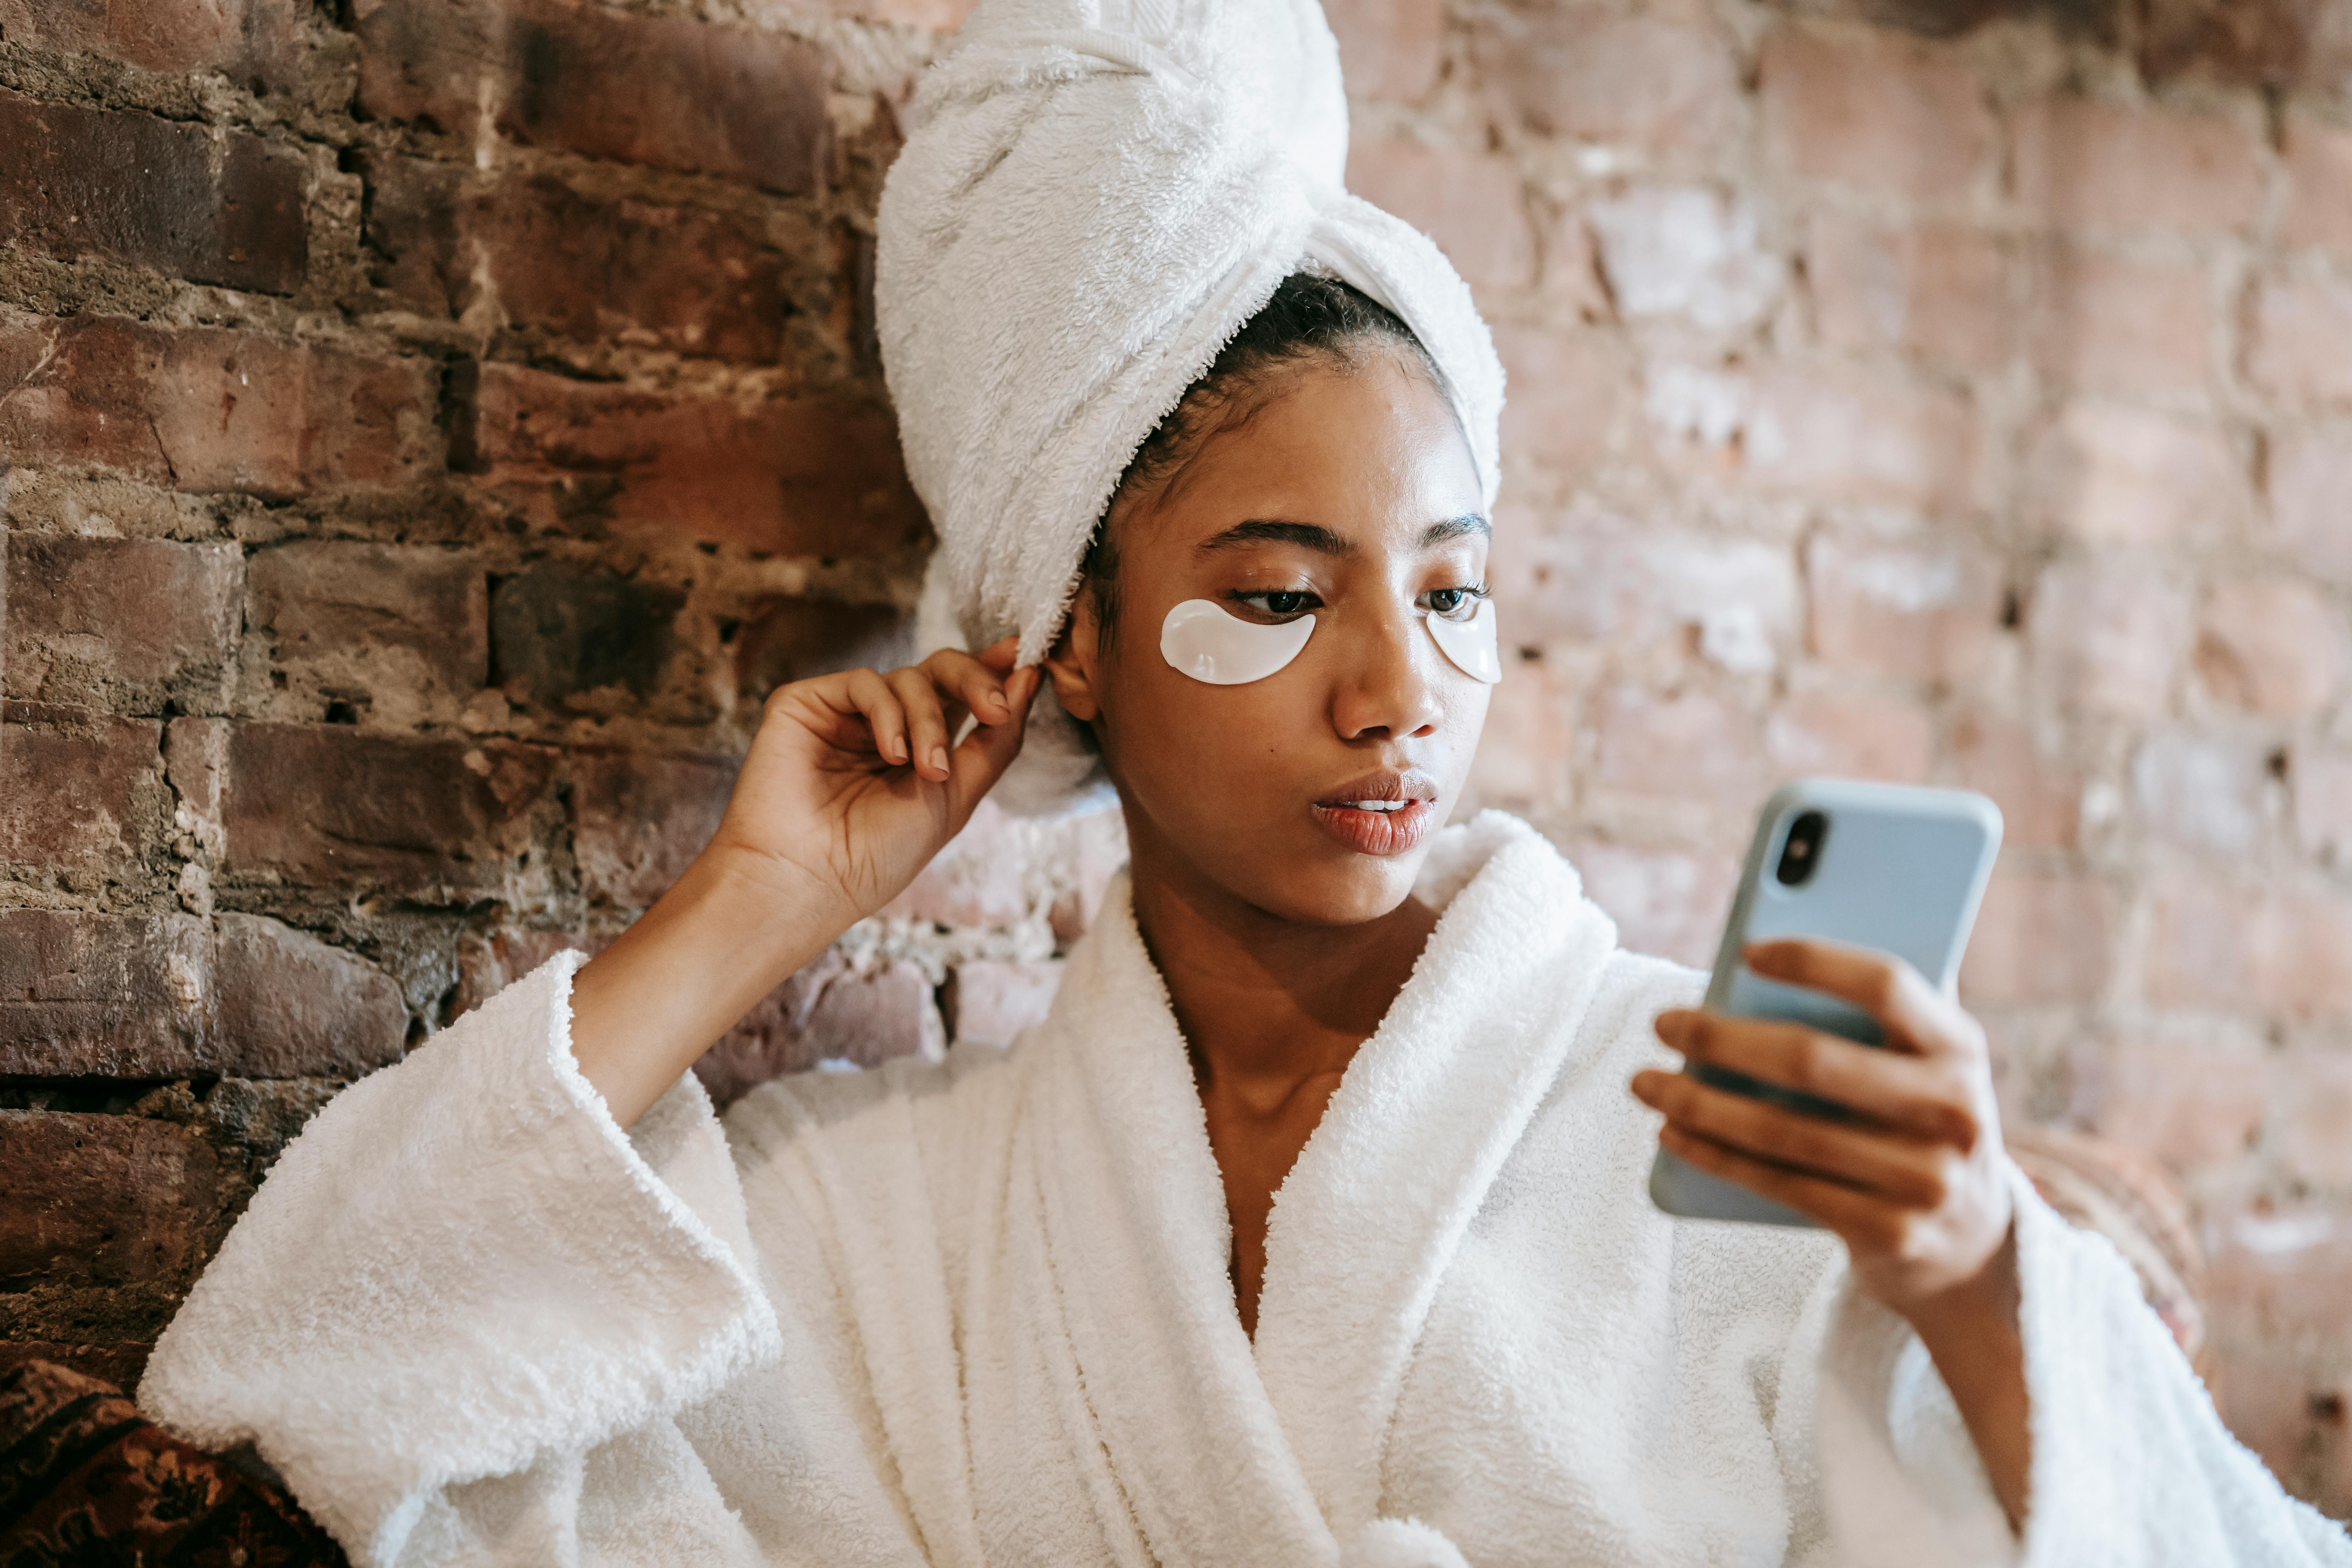 ethnic woman in eye patches watching smartphone in spa salon